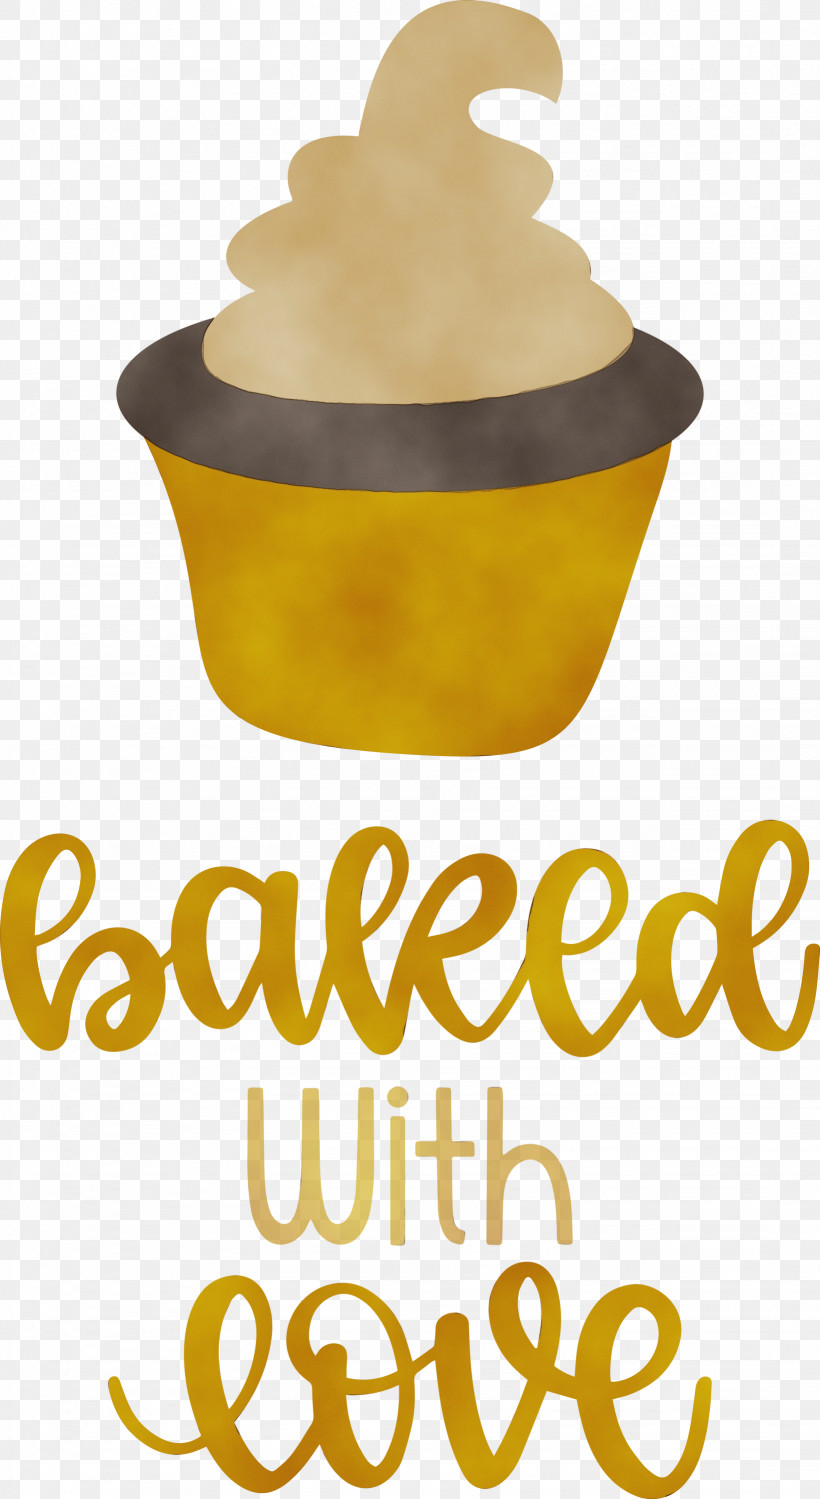 Yellow Cookware And Bakeware Meter Cream, PNG, 1641x3000px, Baked With Love, Cookware And Bakeware, Cream, Cupcake, Food Download Free